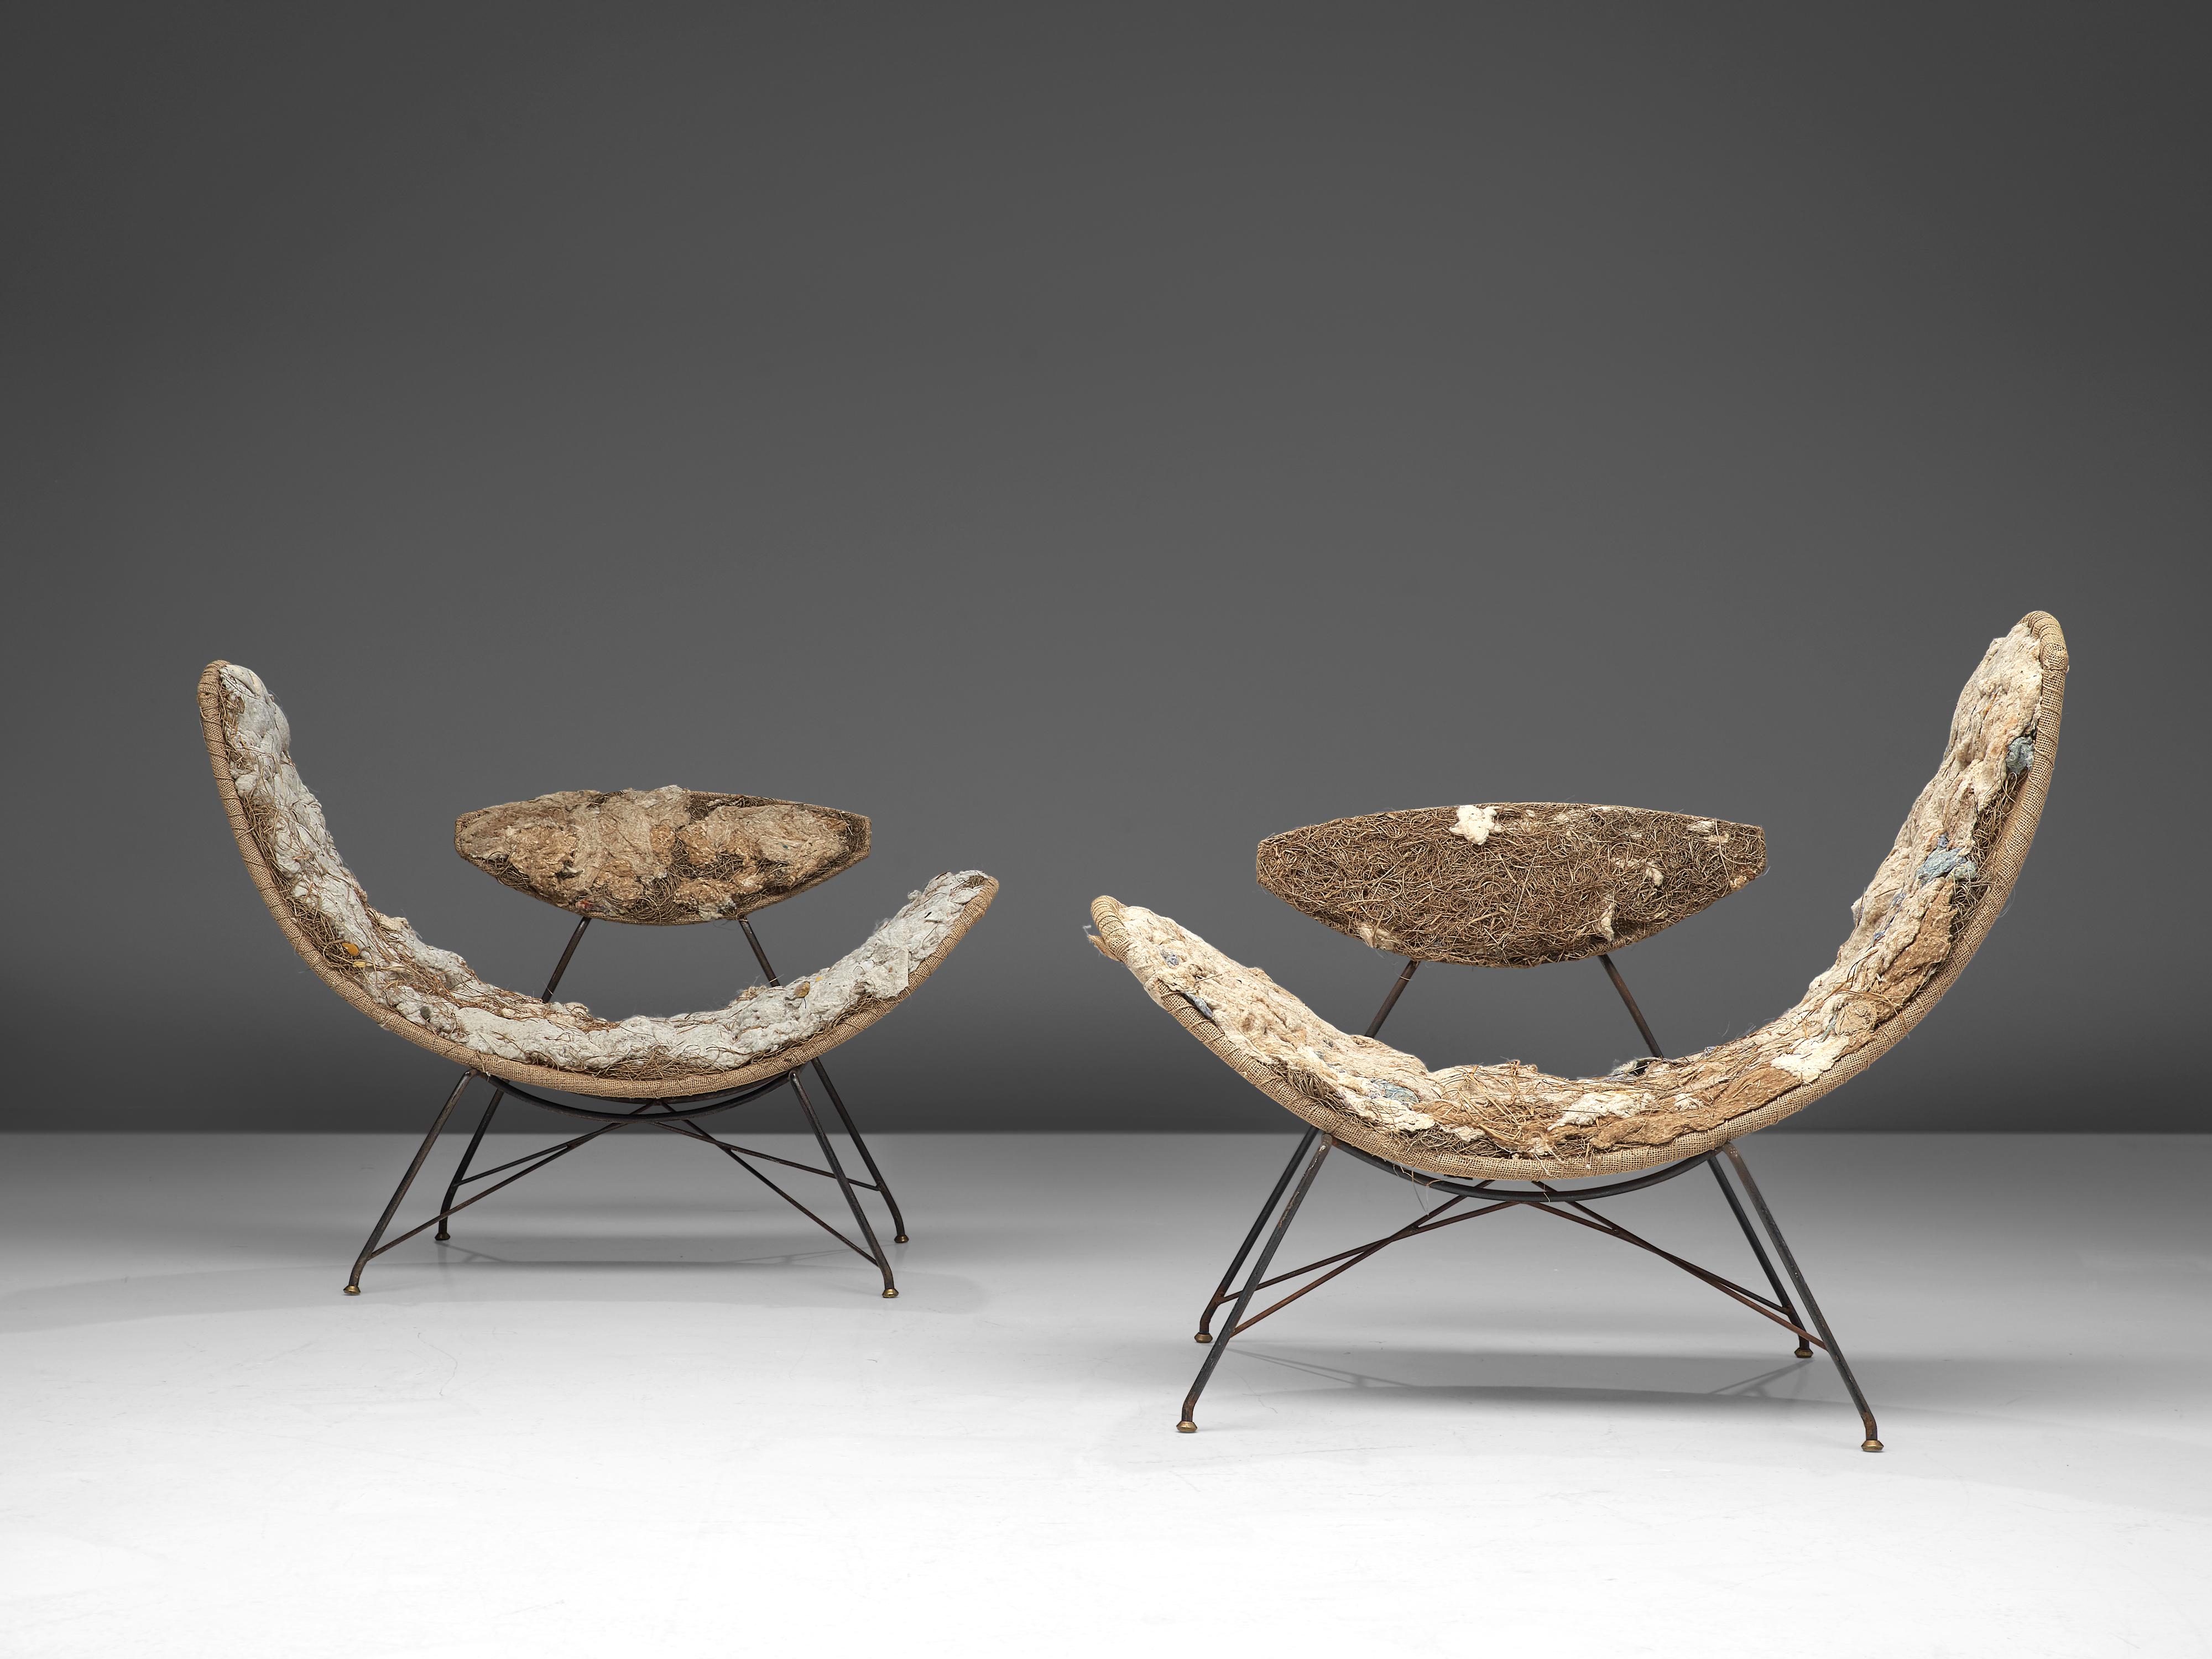 Martin Eisler and Carlo Hauner, pair of early edition ‘Reversible’ chairs, brass, fabric, iron, jute, straw, Brazil, 1955

Iconic ‘Reversible’ chairs by Eisler and Hauner designed in 1955. This design is sculptural in its appearance. Special feature